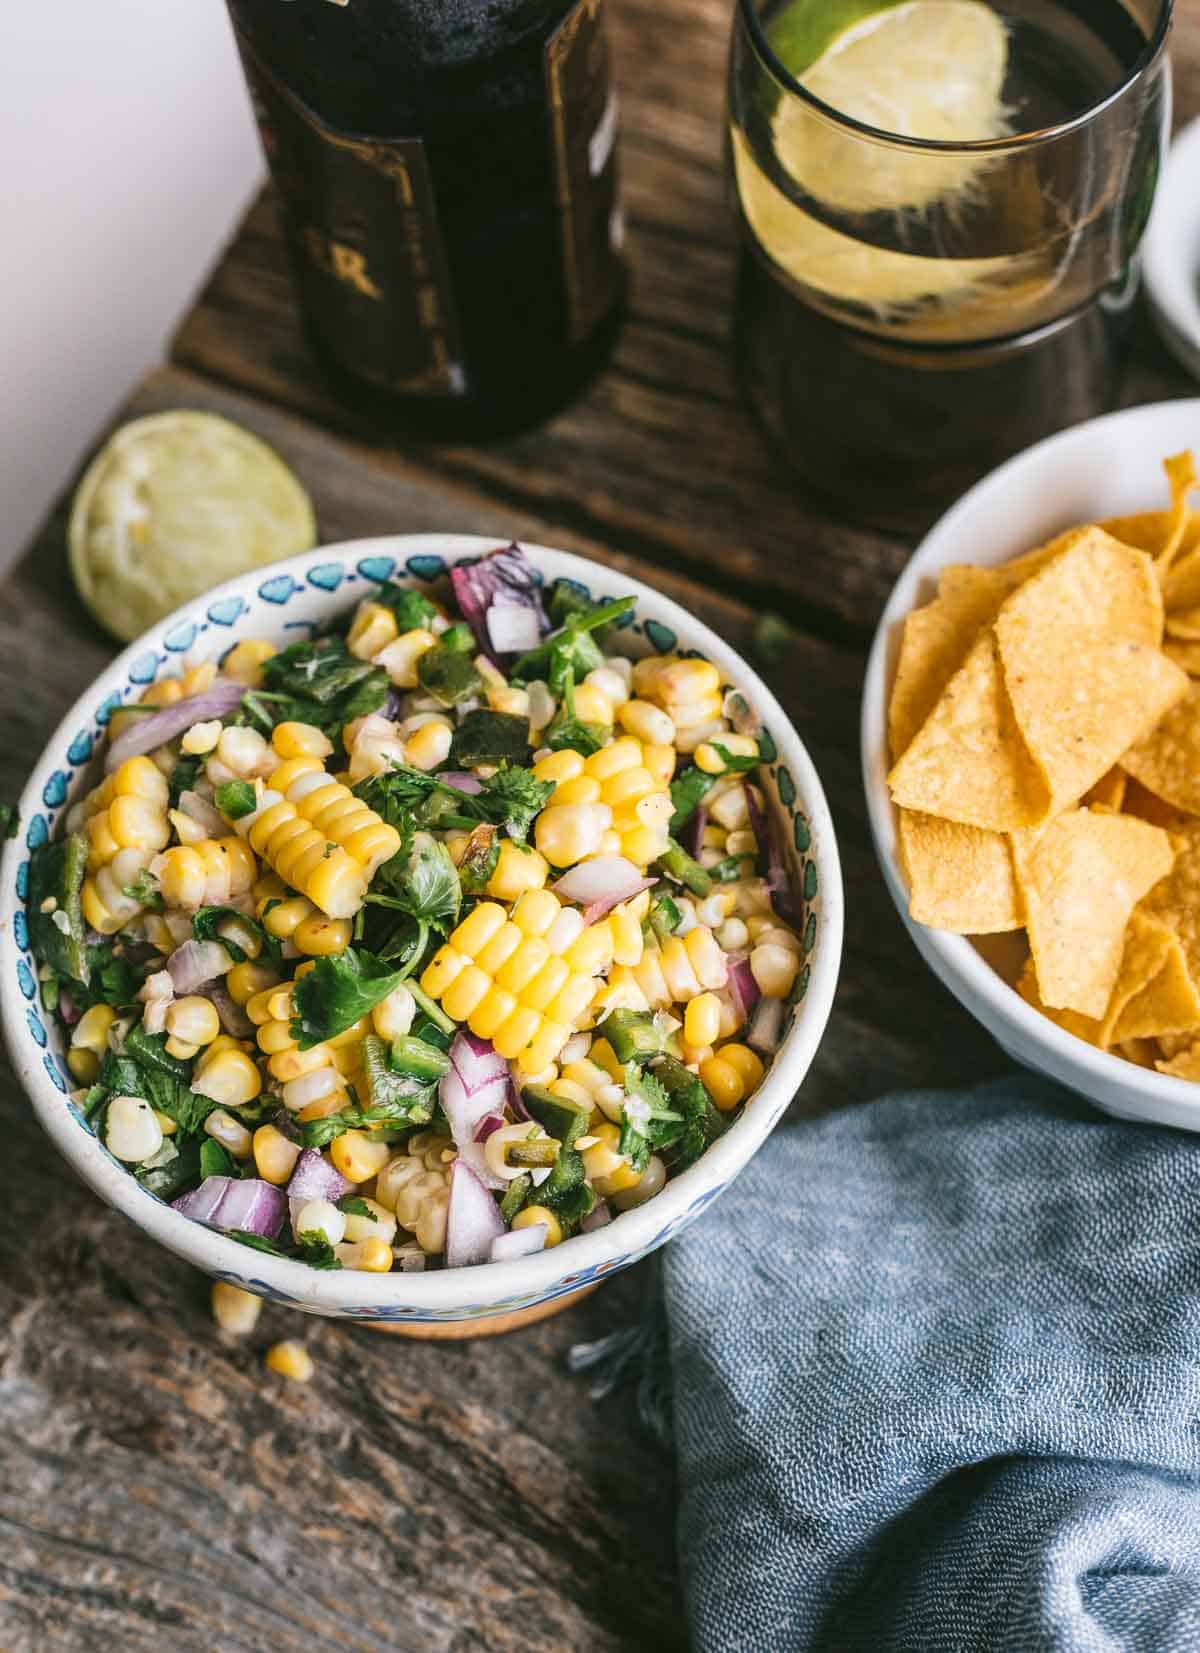 Chipotle copycat corn salsa in a bowl next to a bowl of tortilla chips.